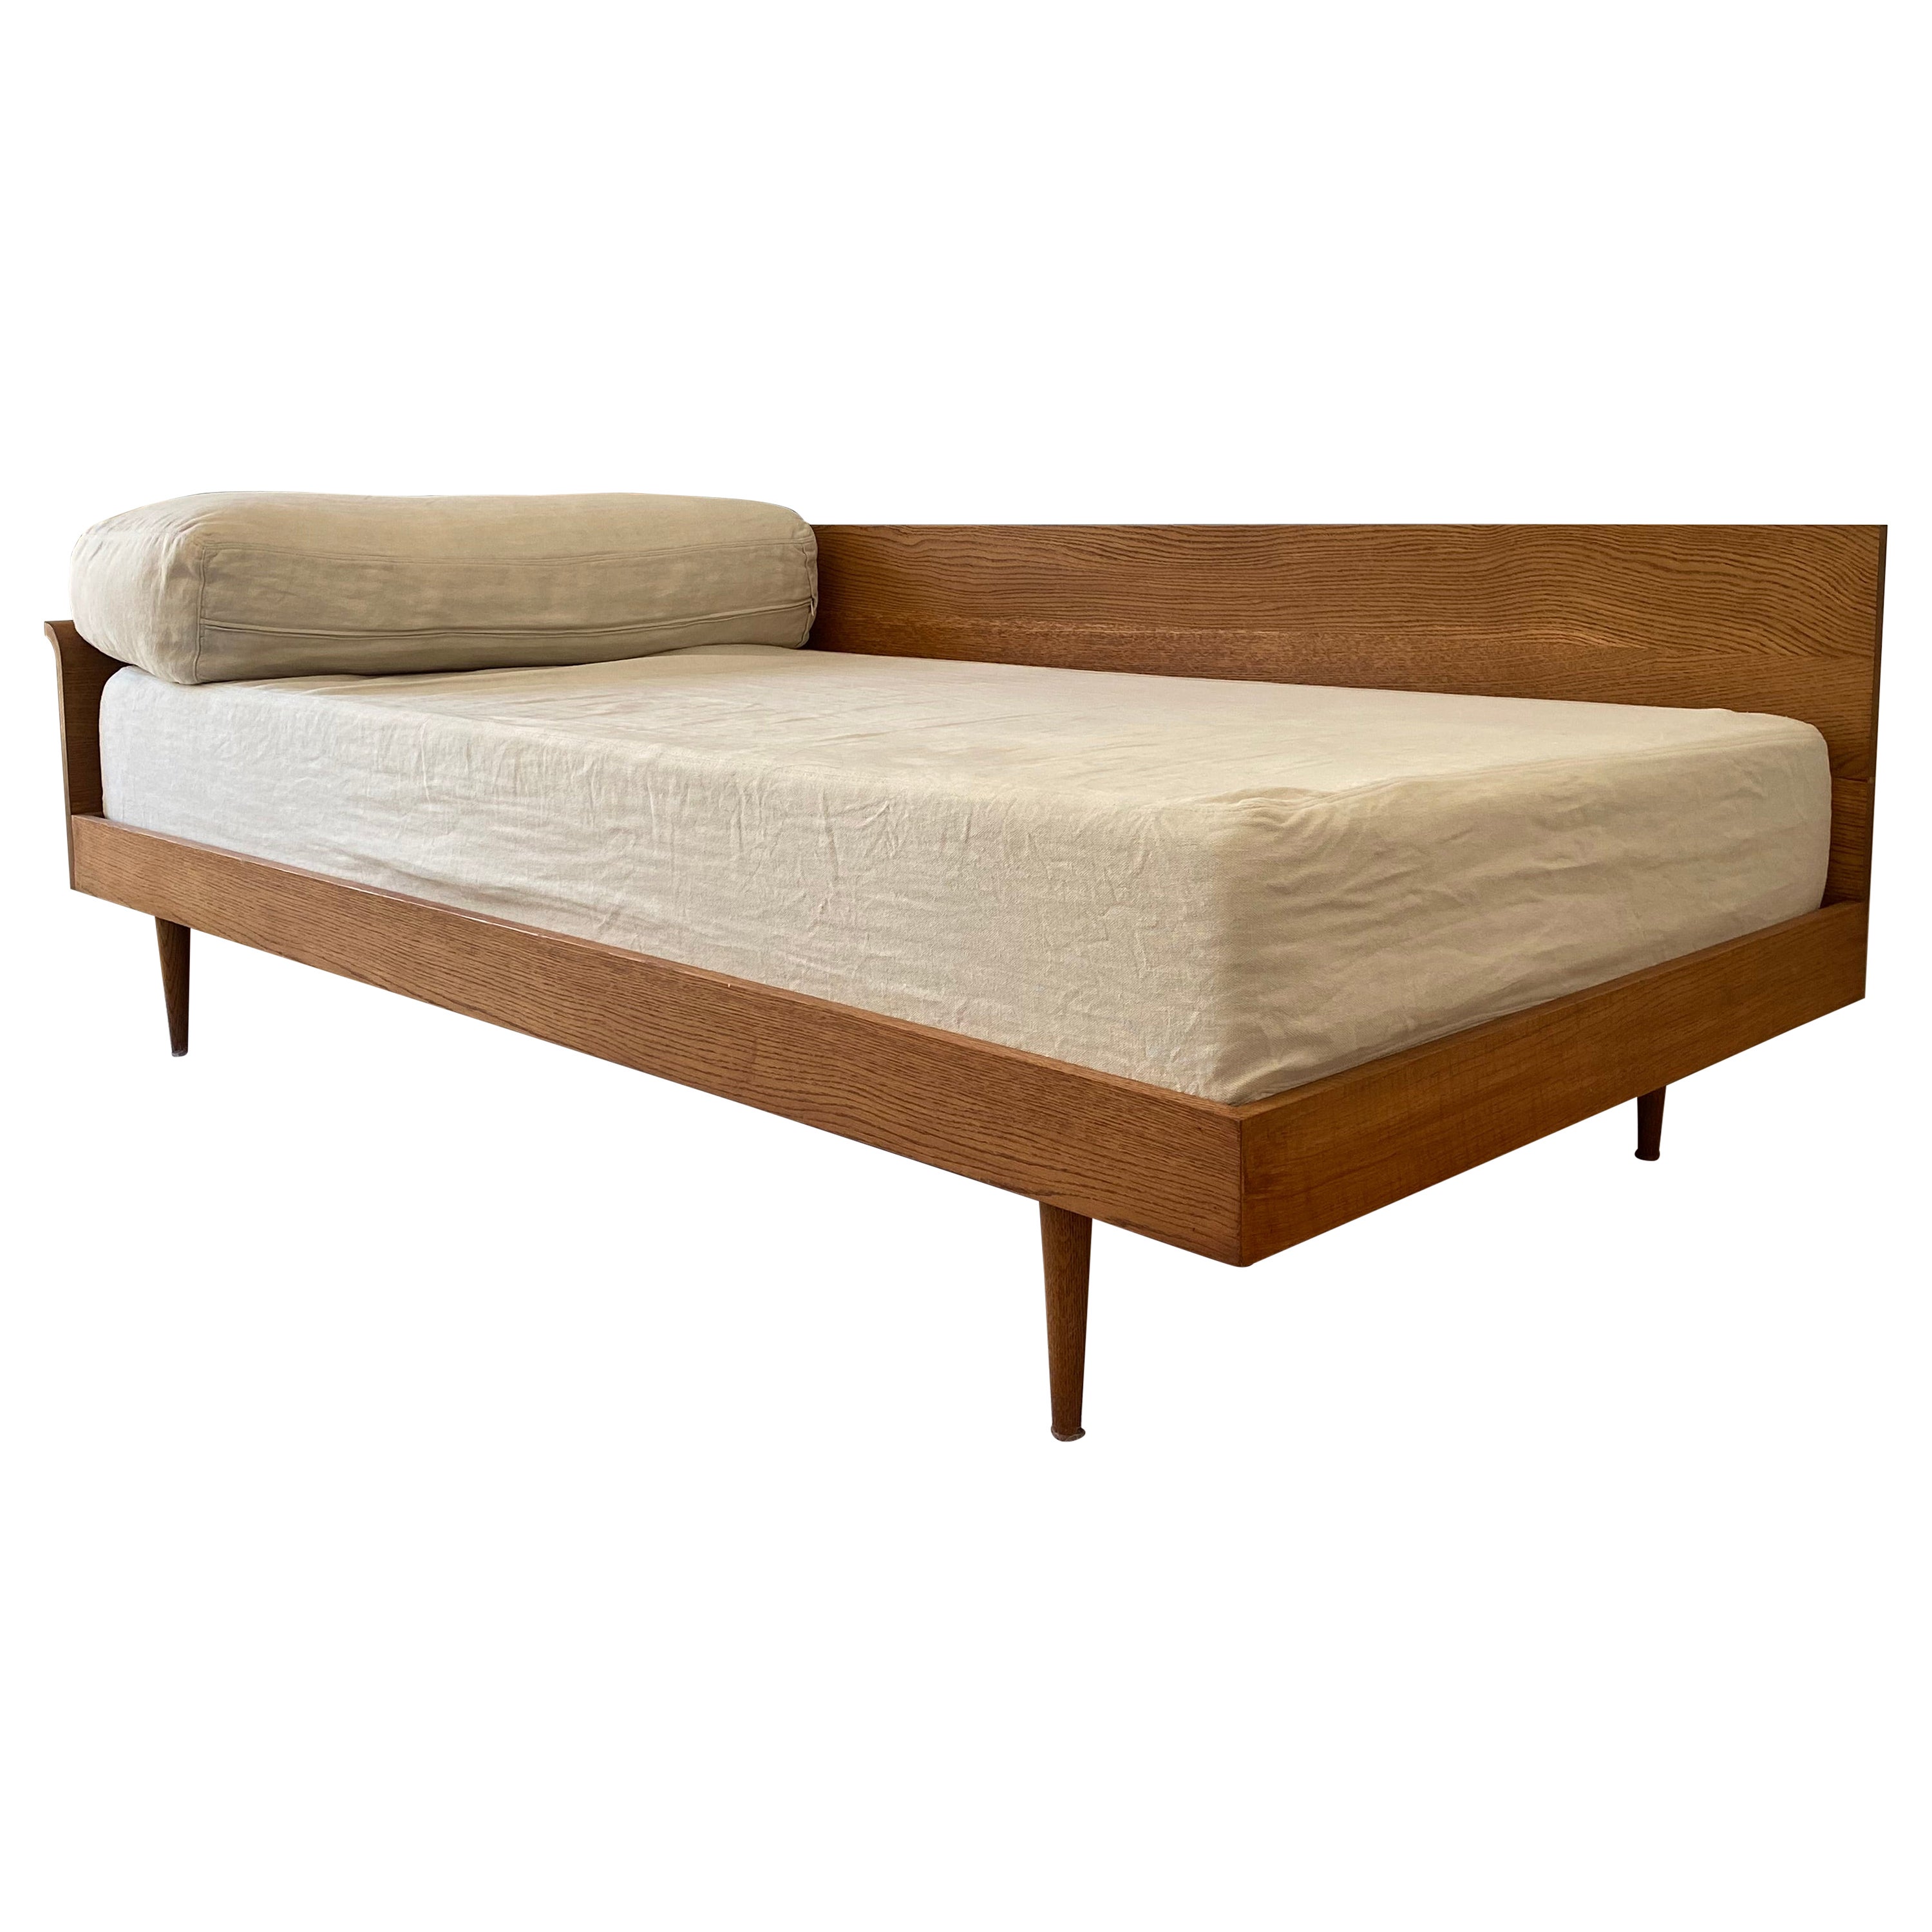 Custom Made Oak Wooden DayBed For Sale